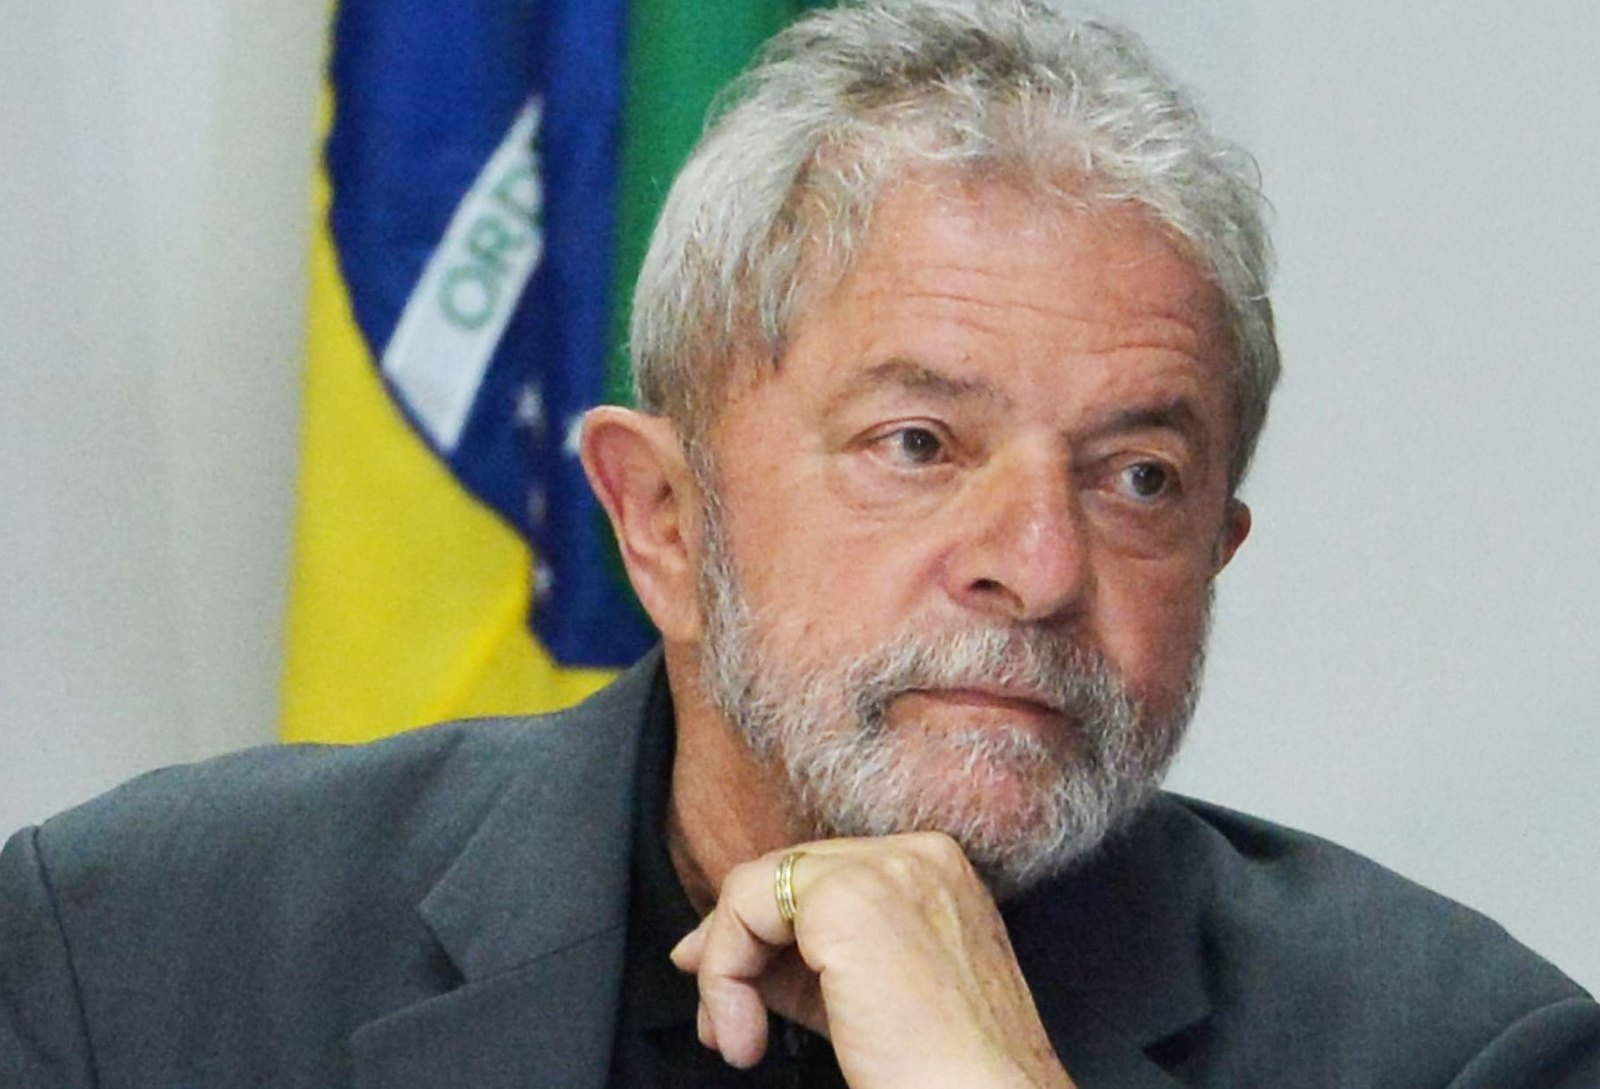 Vijay Prashad on X: There are a few elections that can impact the fate of  the planet. One of them is the October presidential victory of @LulaOficial  in Brazil. President Lula can